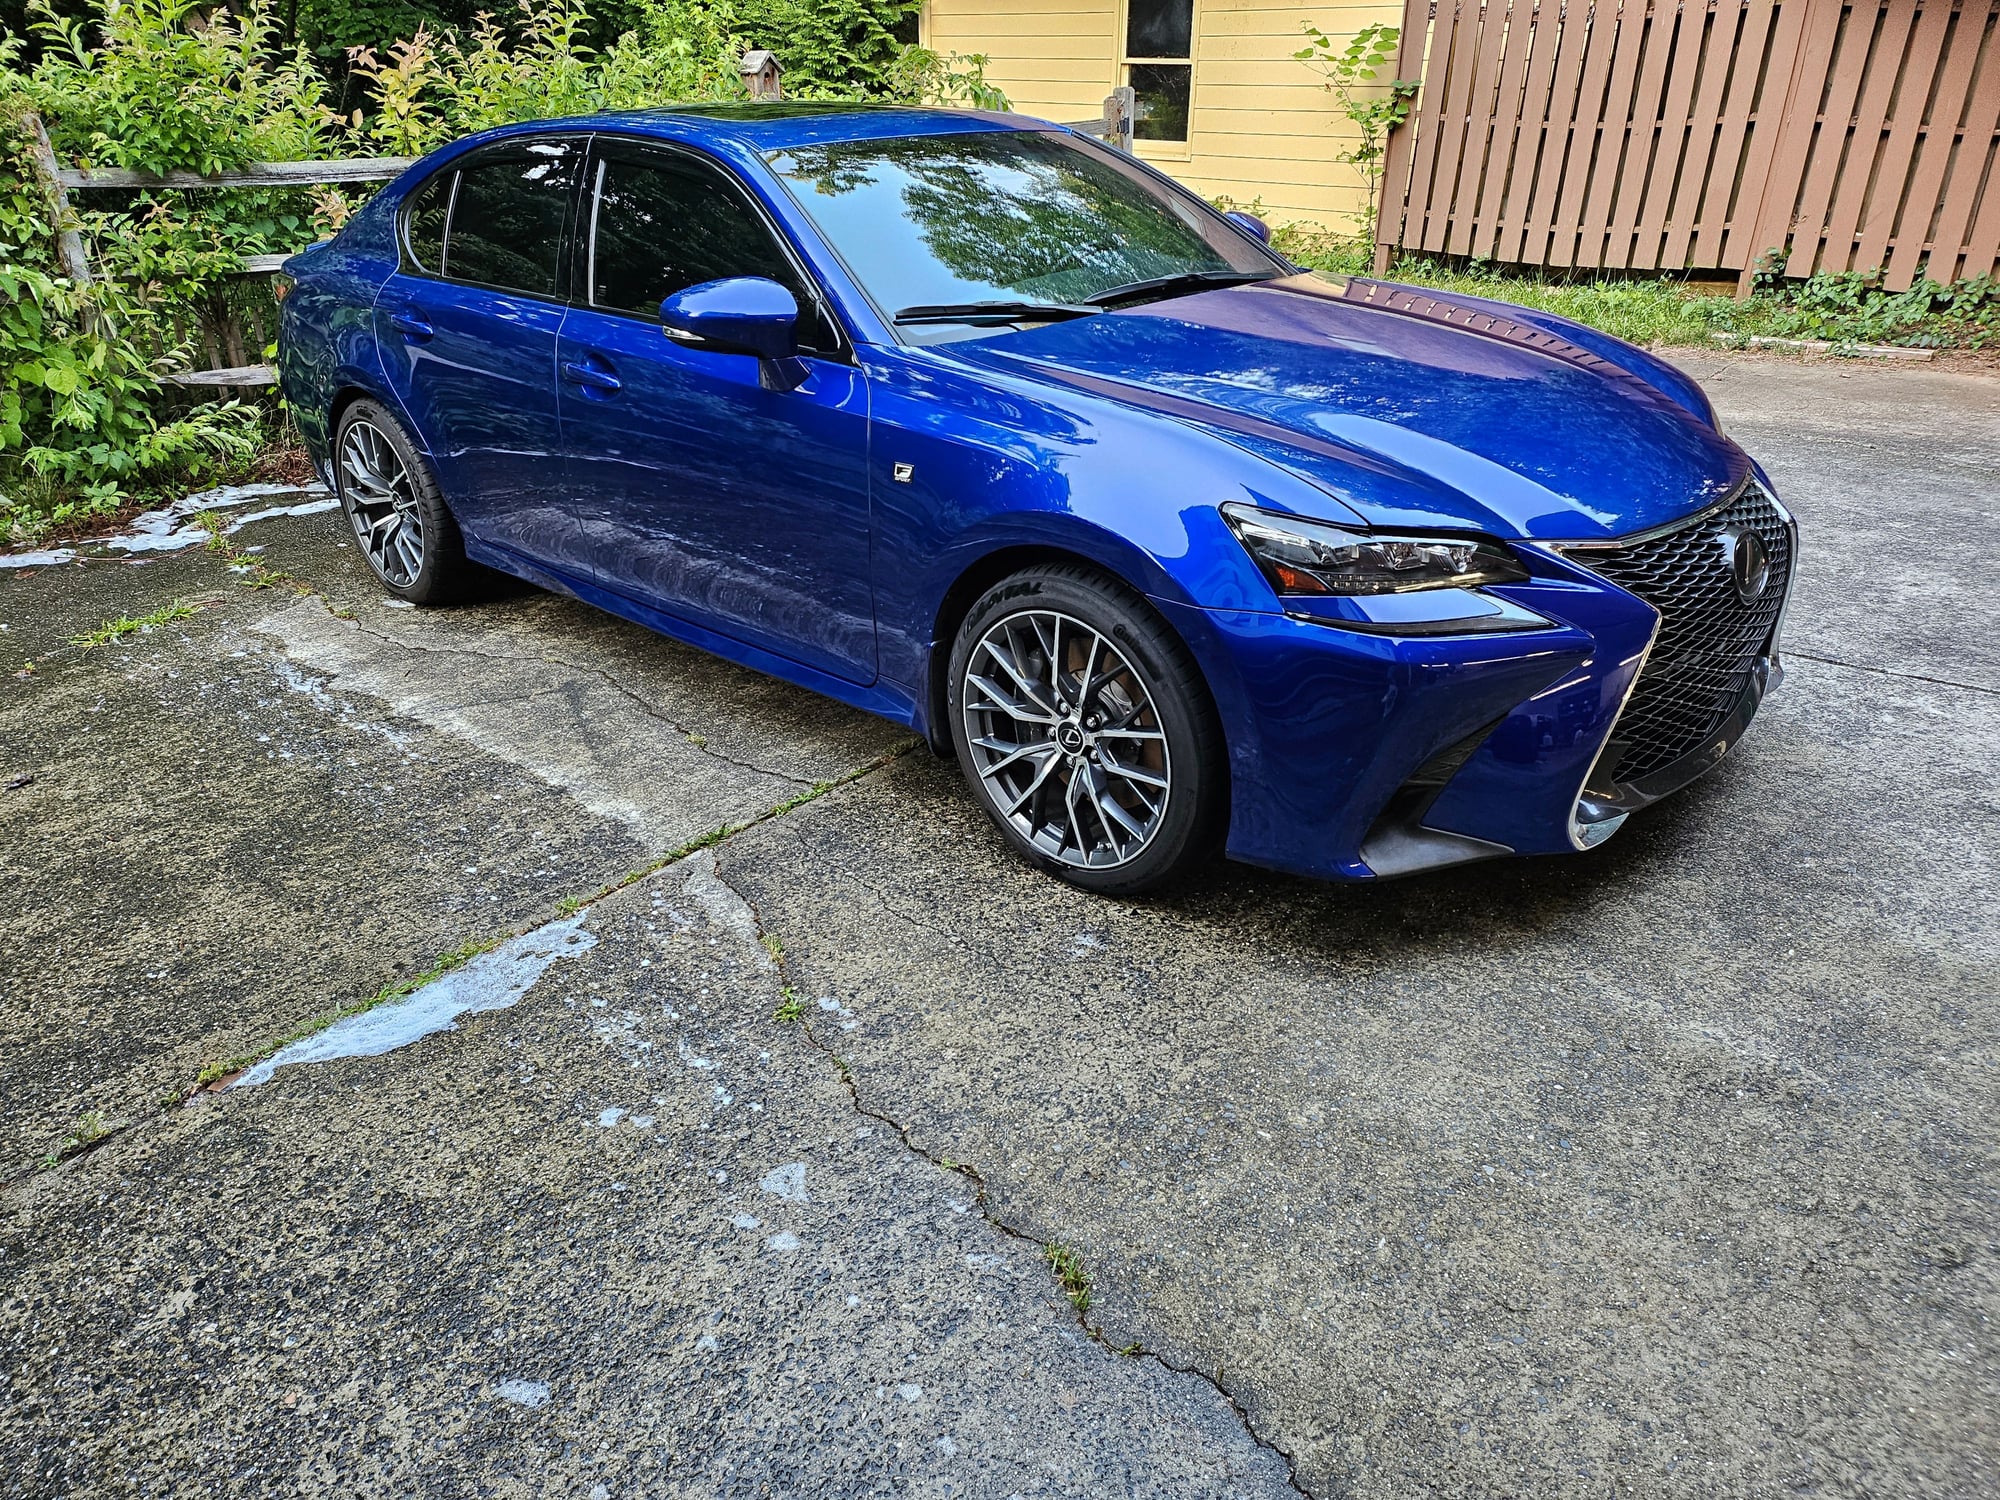 2018 Lexus GS350 - 2018 usb gs350 rwd fsport with luxury options 37k obo - Used - Charlotte, NC 28105, United States